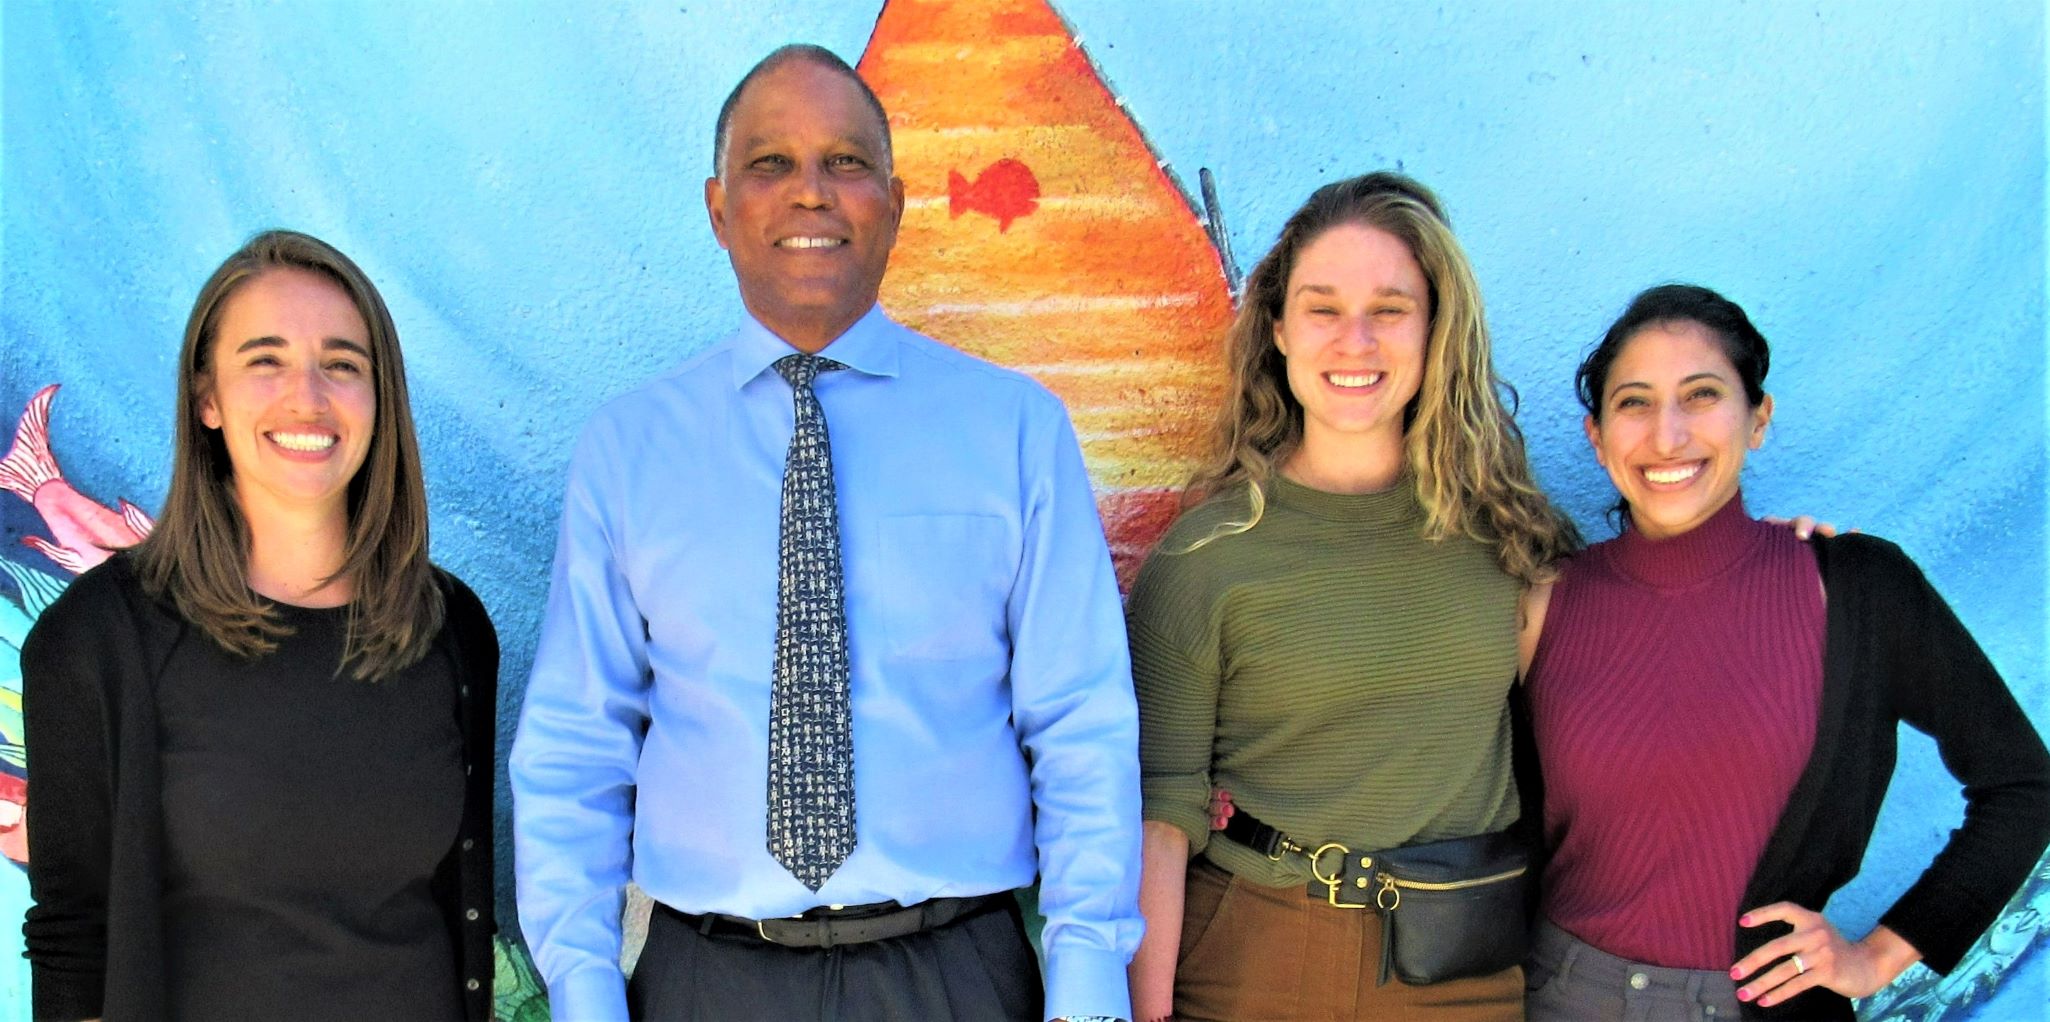 Chief residents stand with Dr. Neil Powe against bright mural background